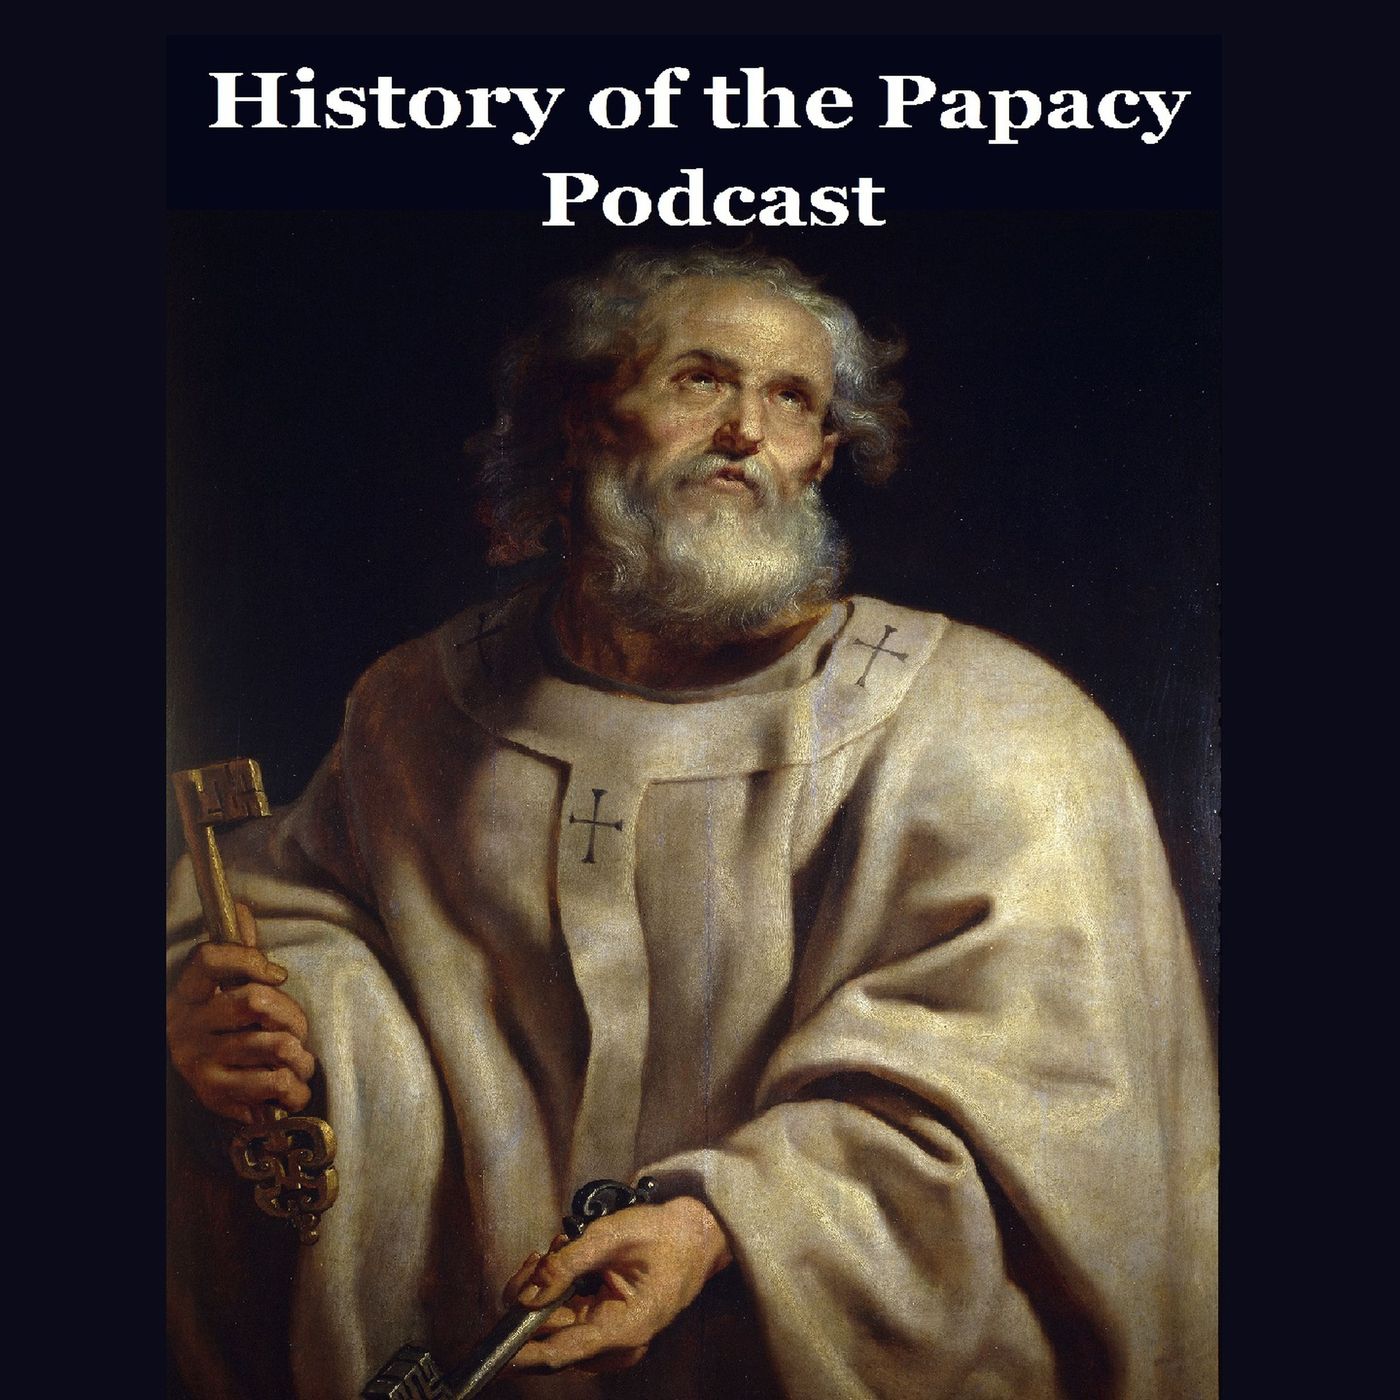 Episode 36: The Council of Nicaea Part 10, The Canons Continued Again